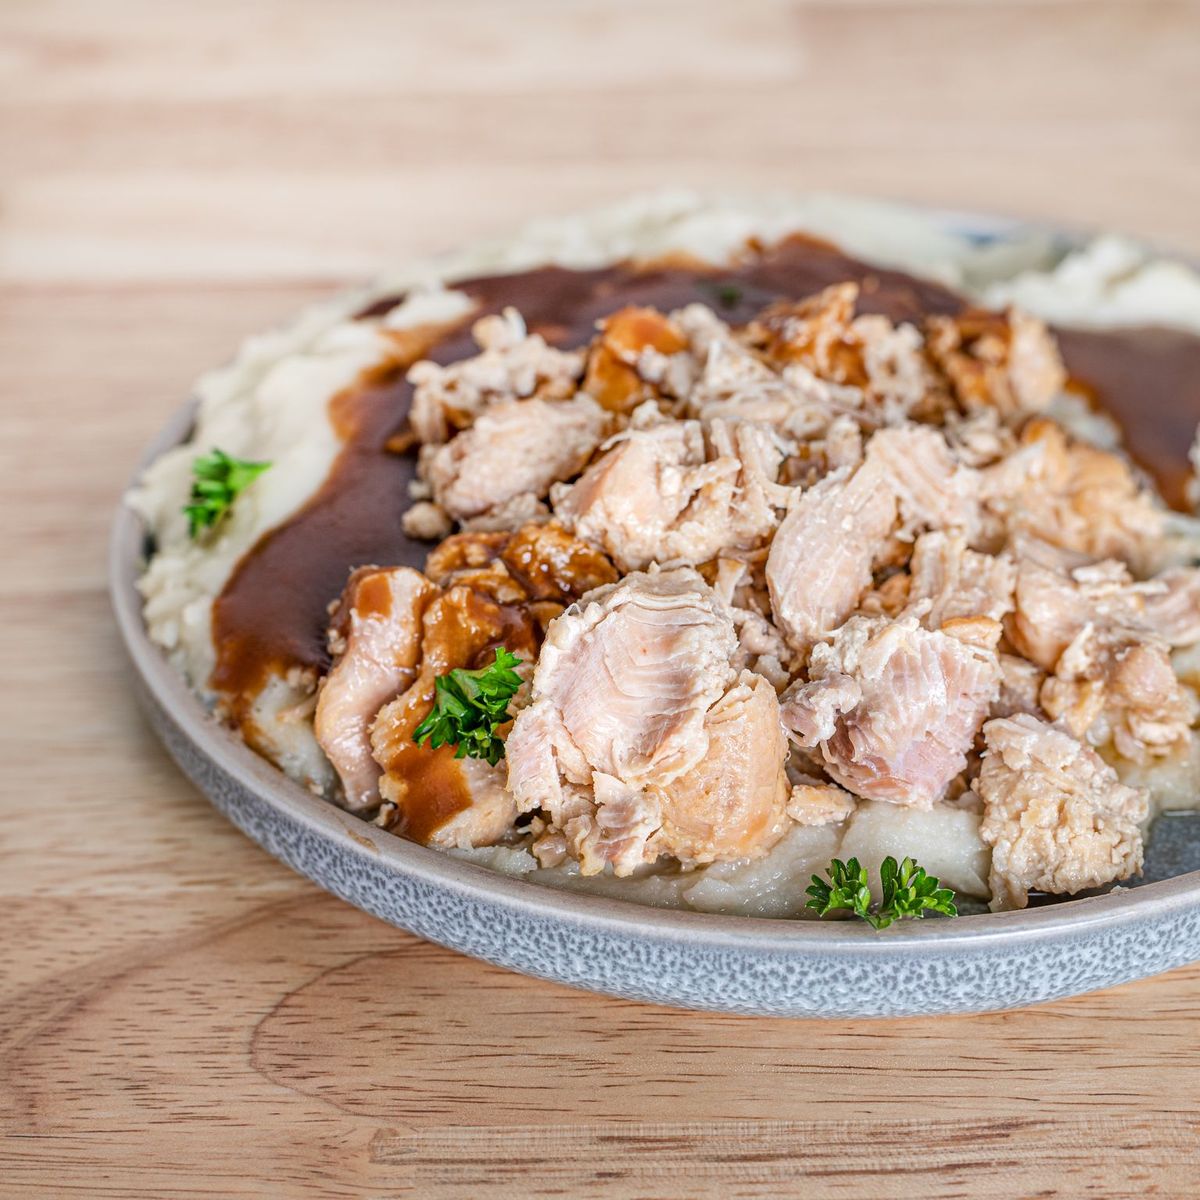 A plate of chicken and gravy on a wooden table, perfect for emergency food storage.